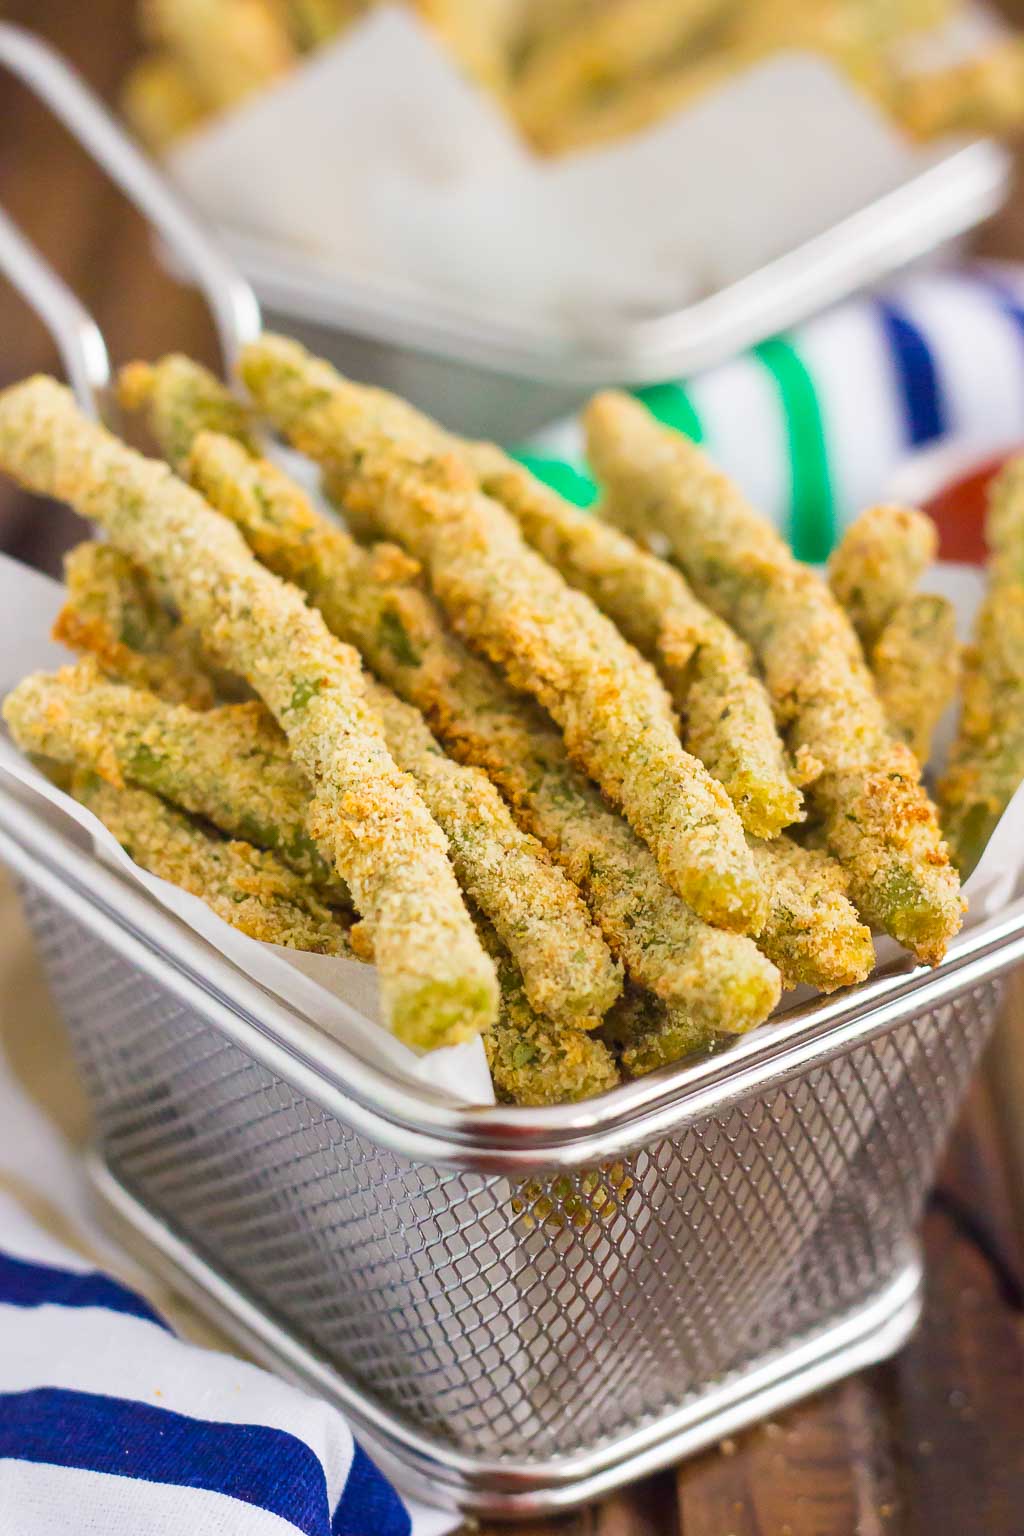 These Baked Parmesan Green Bean Fries are coated with a mixture of Parmesan cheese and spices, and then baked until golden. Crispy, crunchy, and full of flavor, these healthier fries make the perfect appetizer or easy side dish!